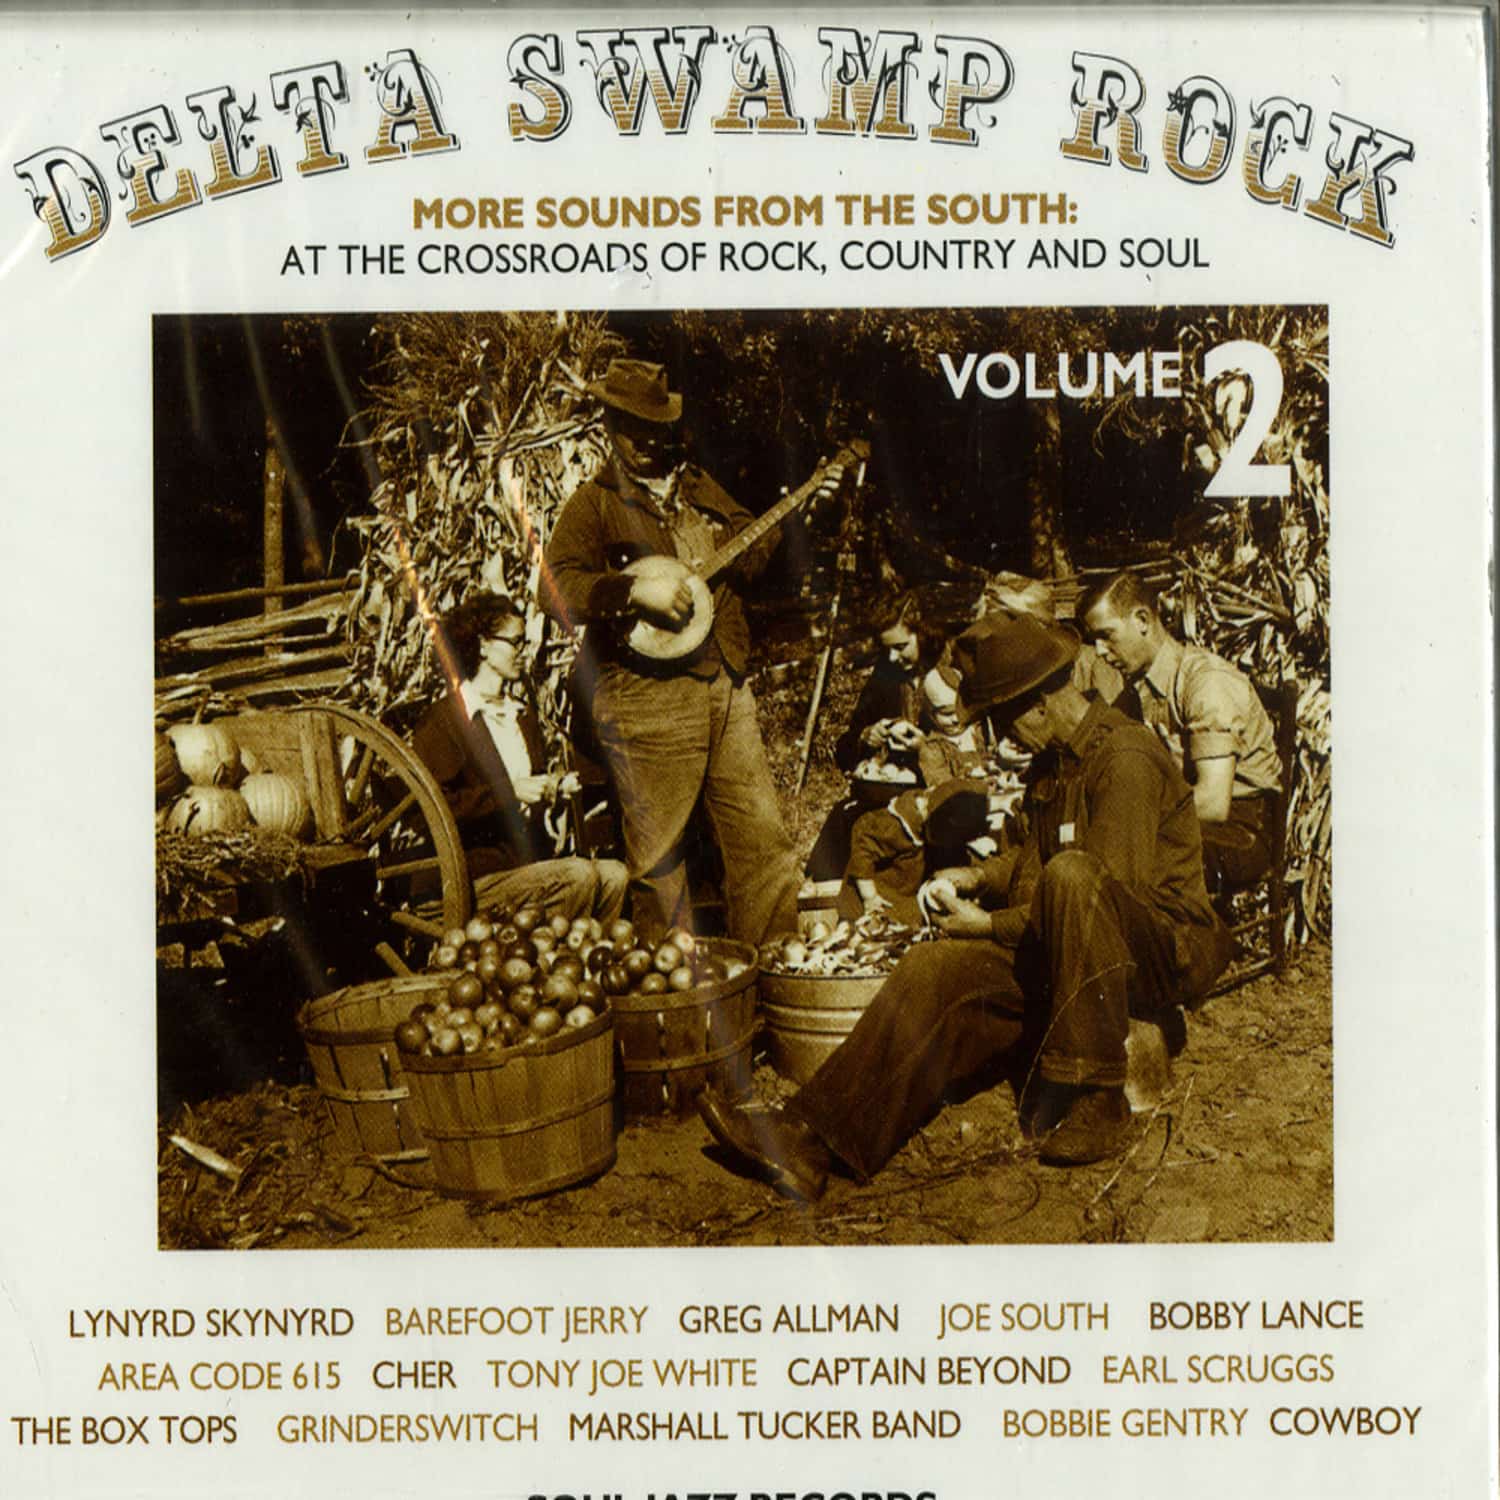 Delta Swamp - MORE SOUNDS FROM THE SOUTH 1968 - 75 